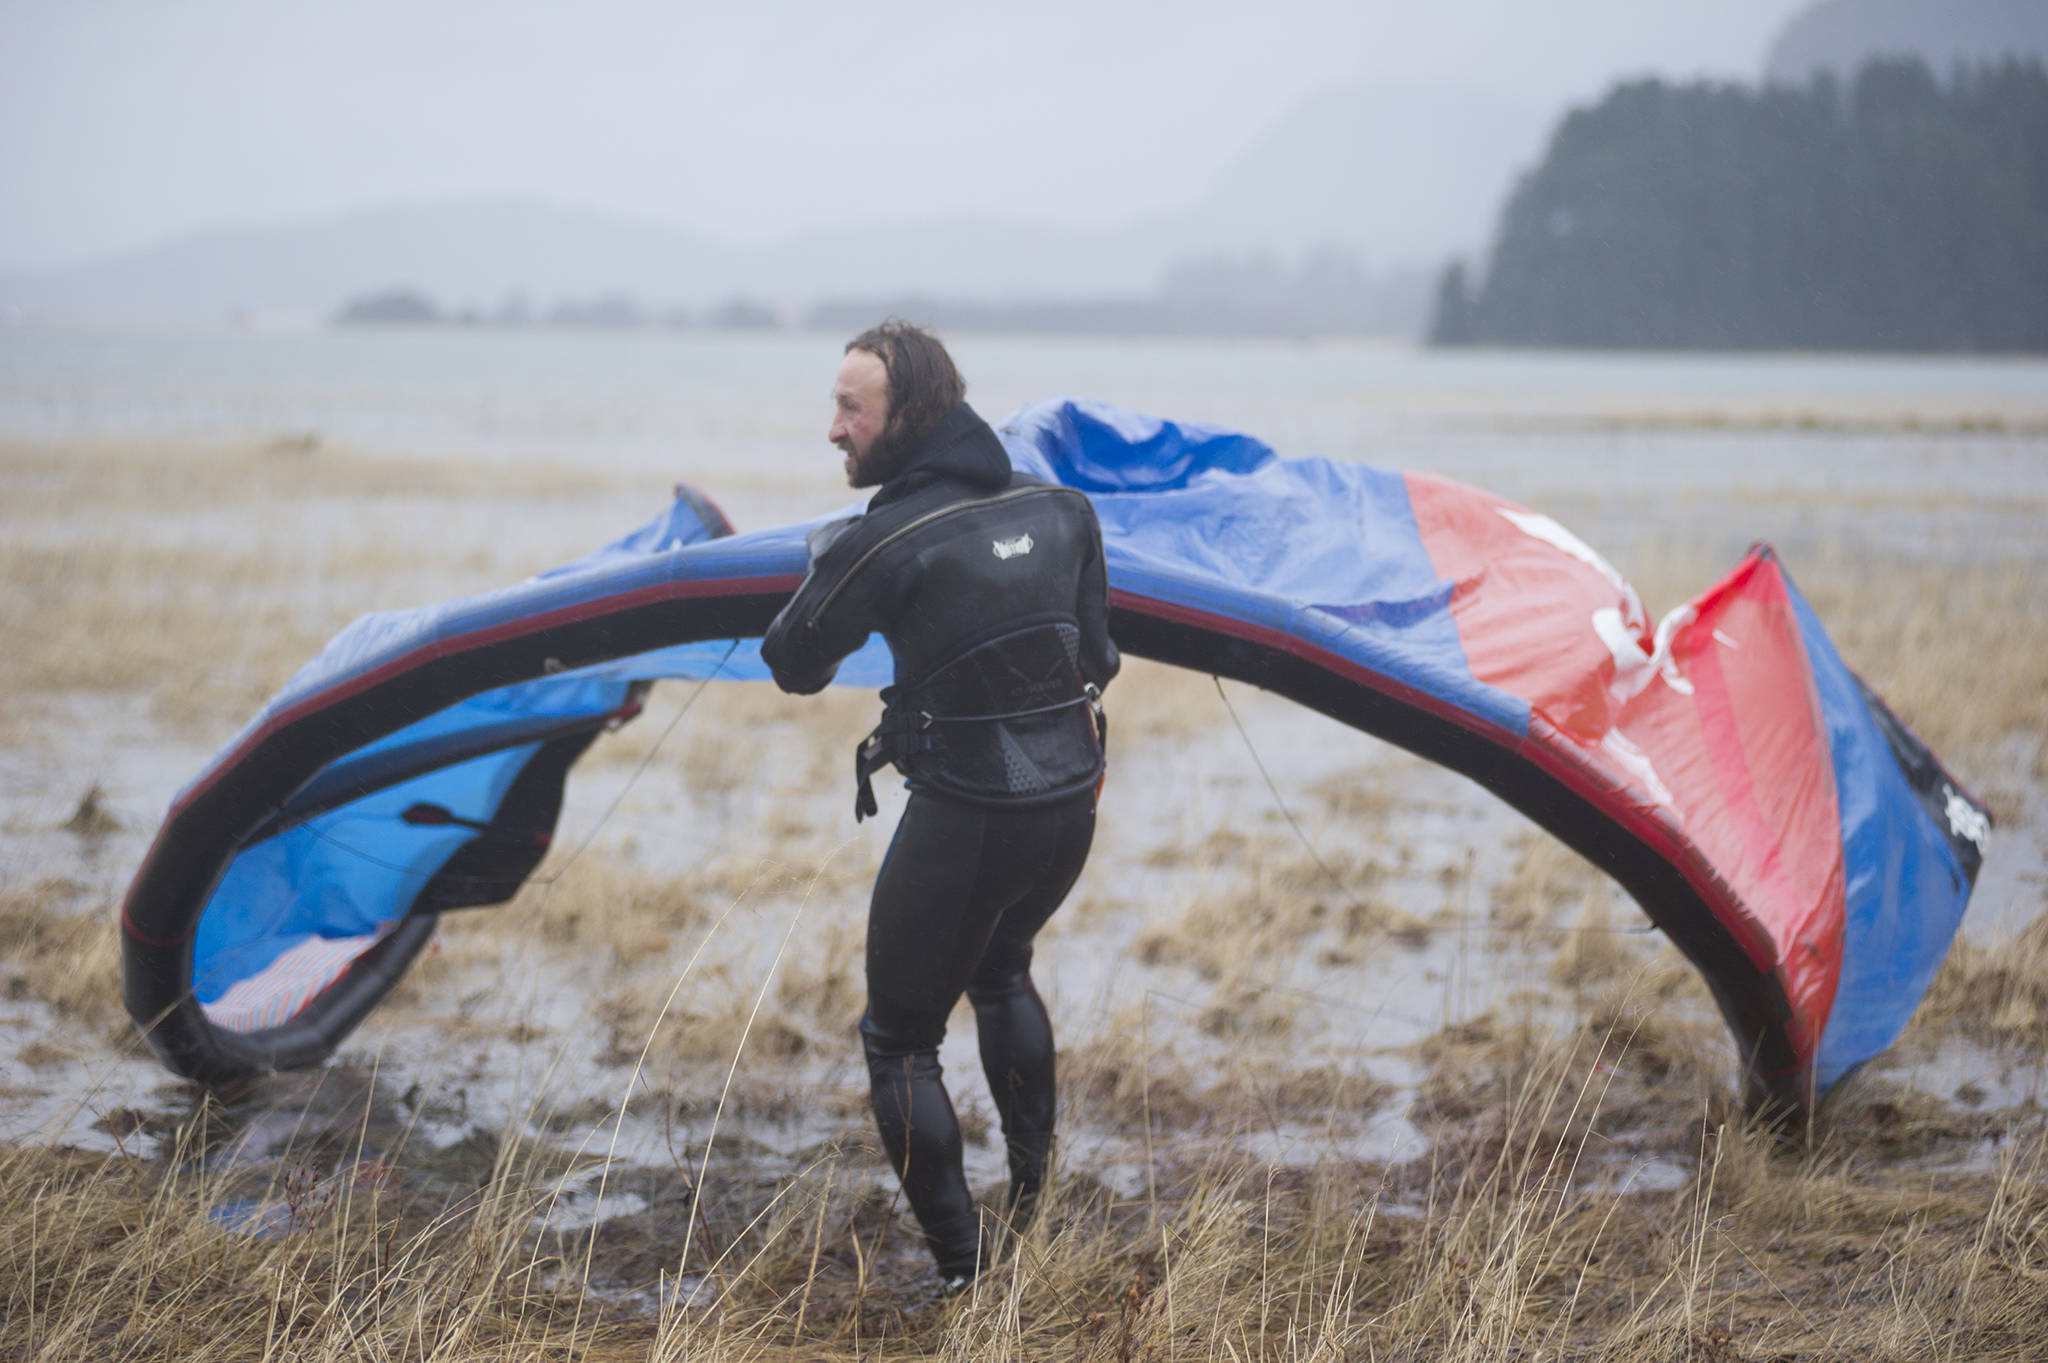 Rob Cadmus drags his kite back to shore after kiteboarding in the Gastineau Channel on Sunday, Dec. 9, 2018. (Nolin Ainsworth | Juneau Empire)